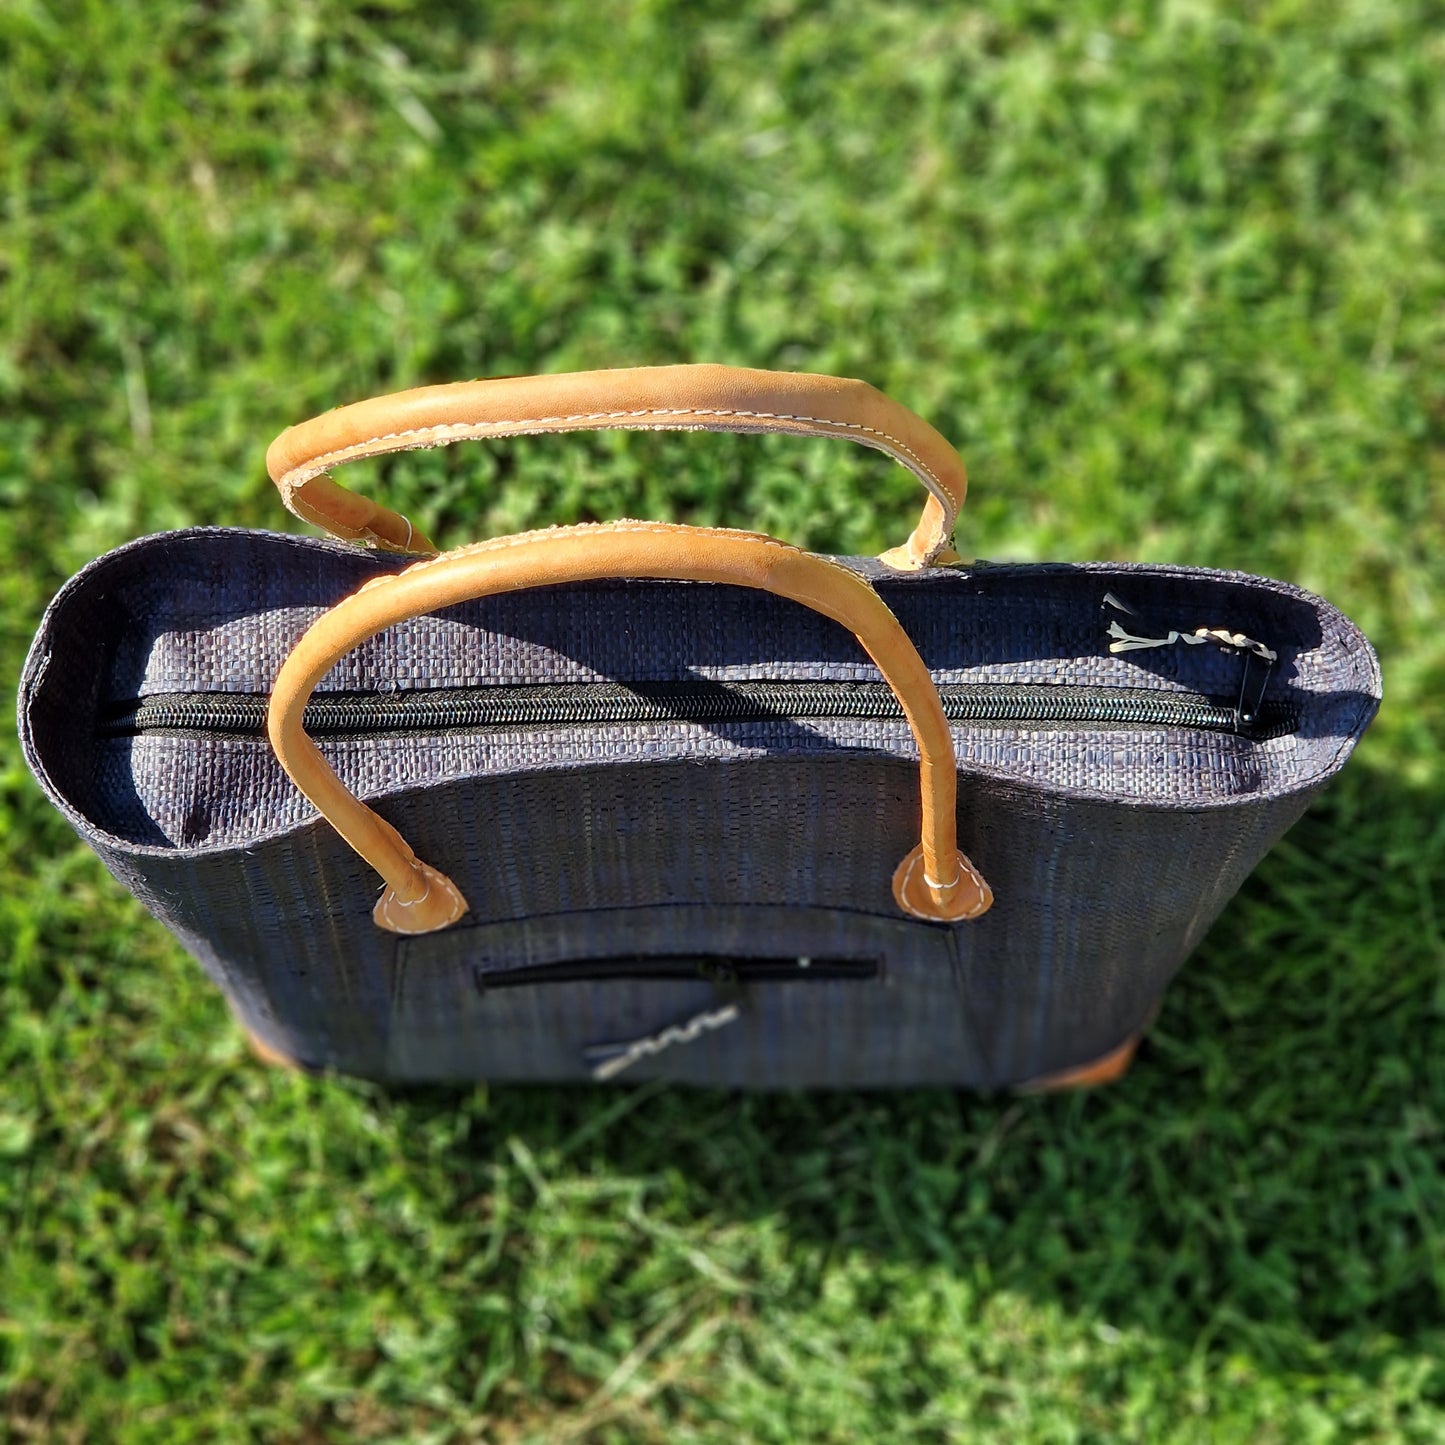 Black Raffia Basket with leather handles and a zip top.